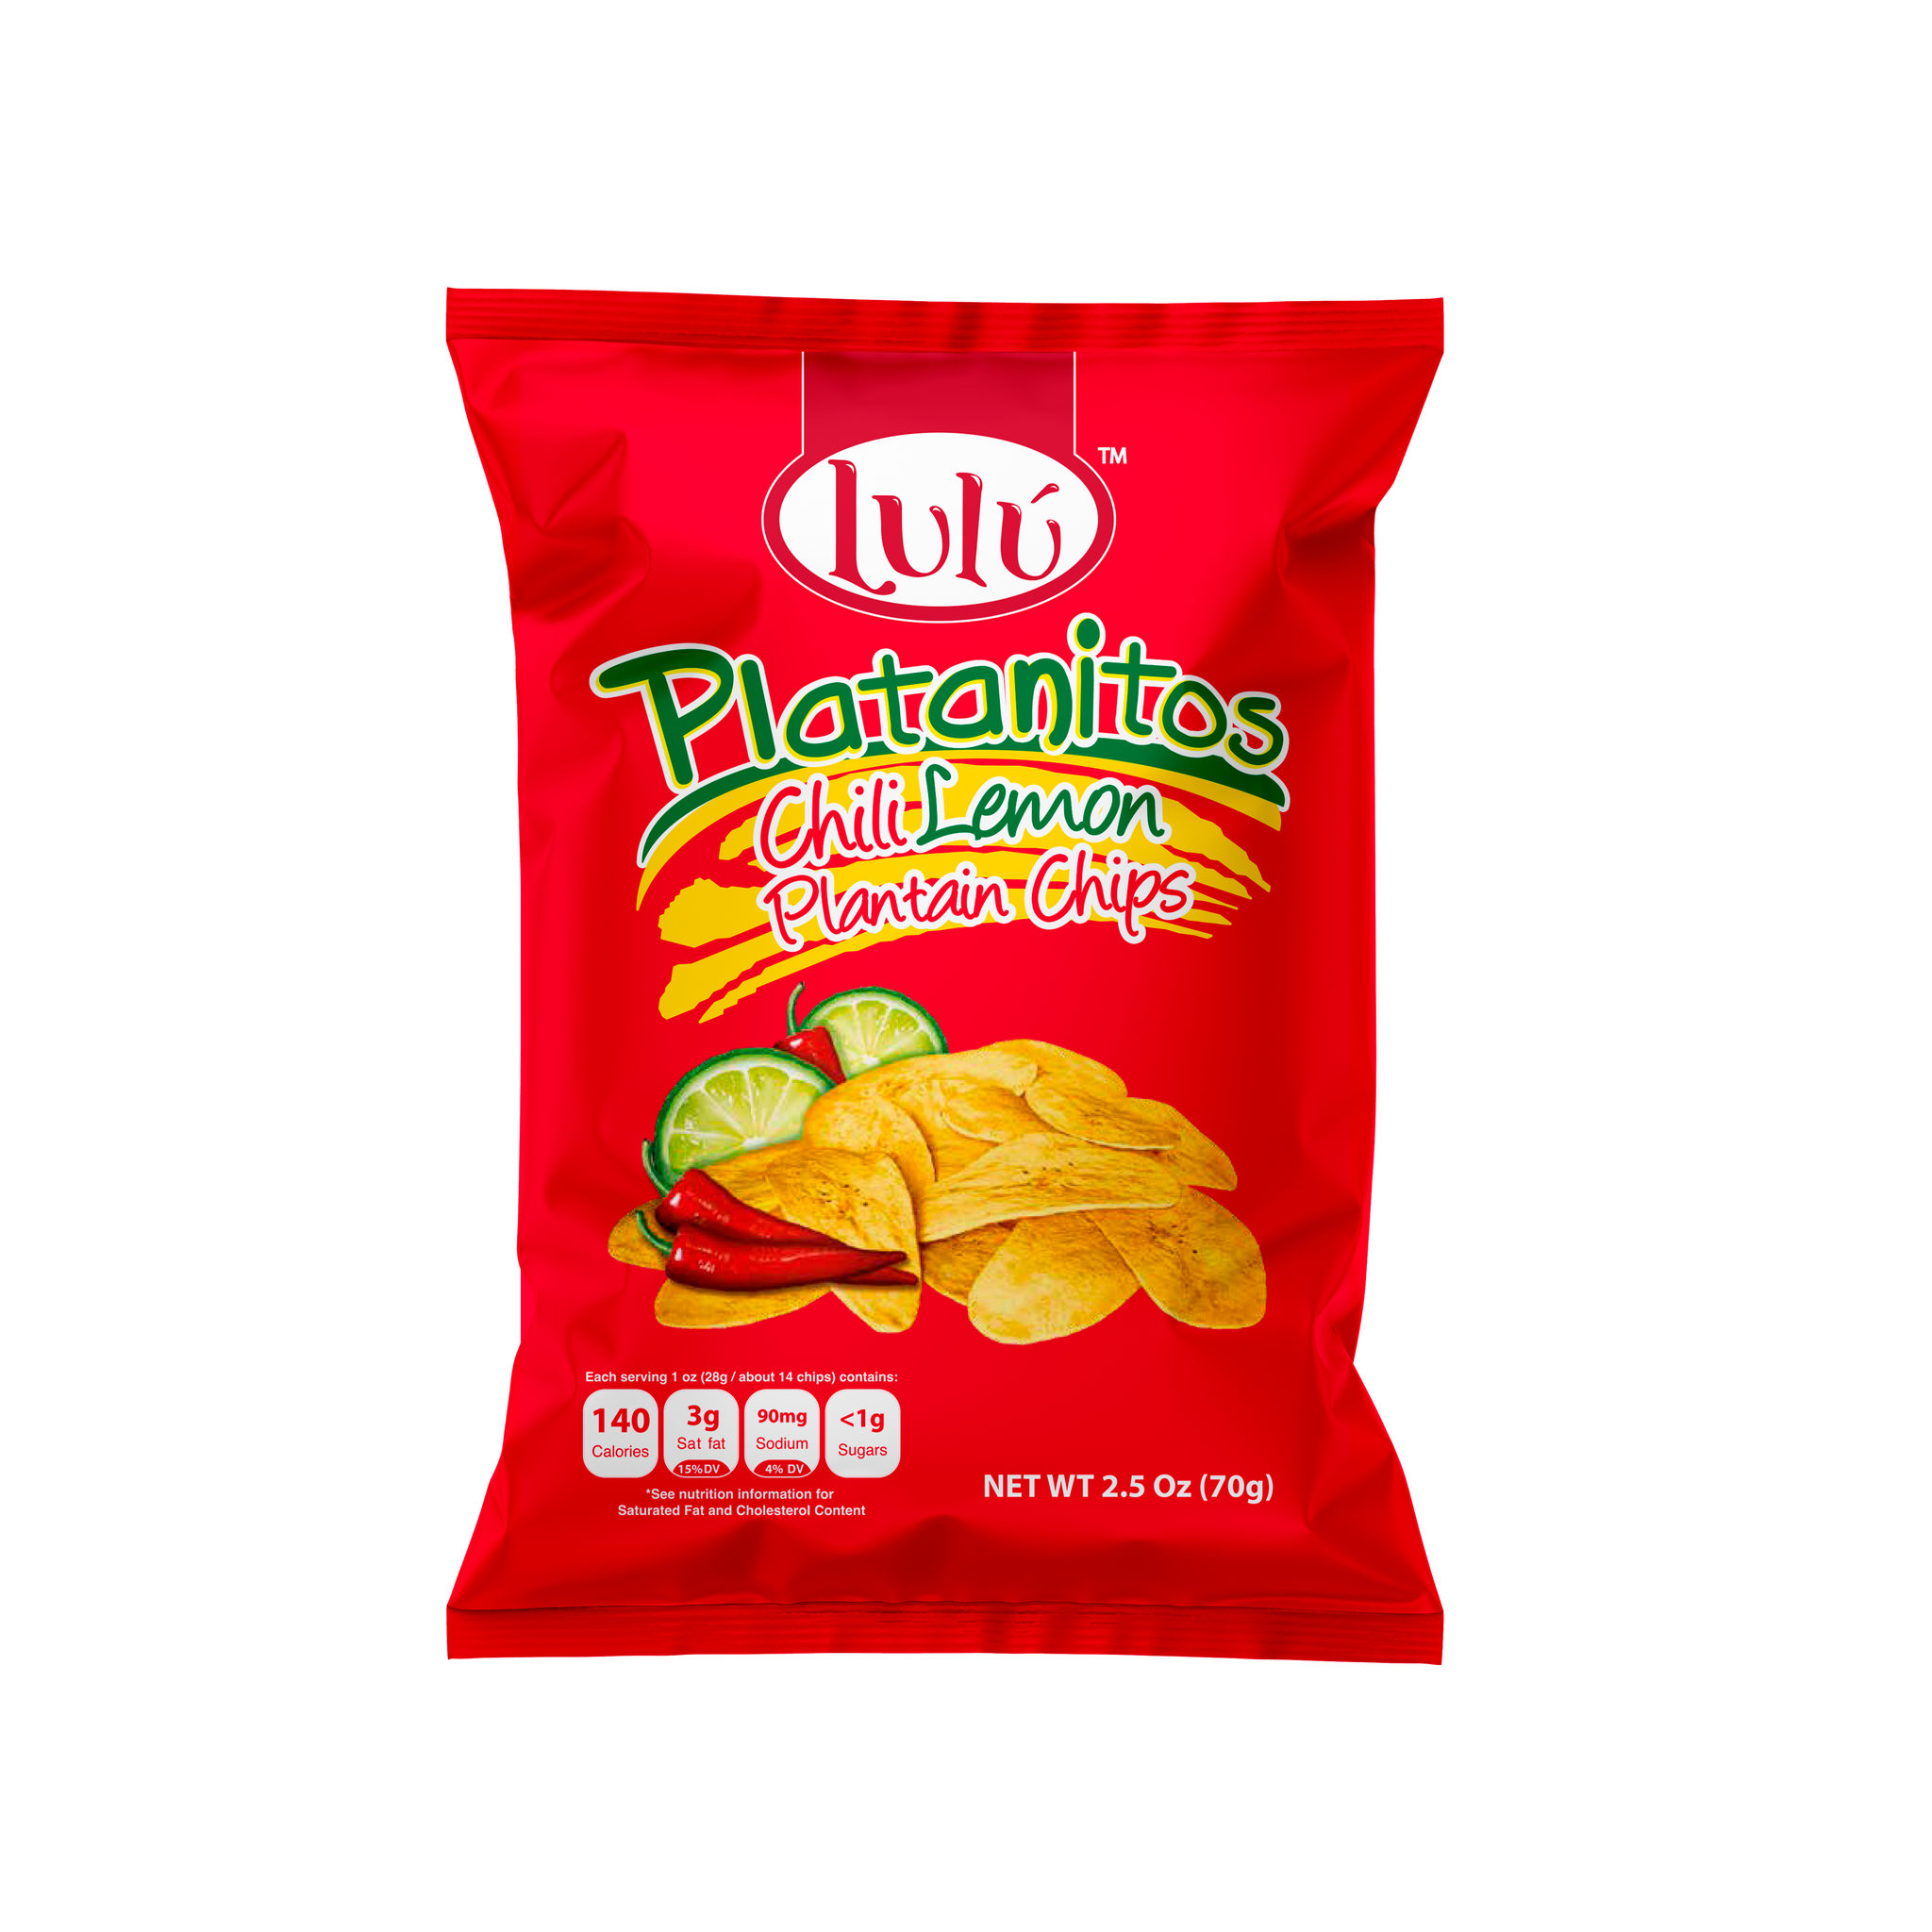  LULU Lime Plantain Chips, Chips Snack Pack